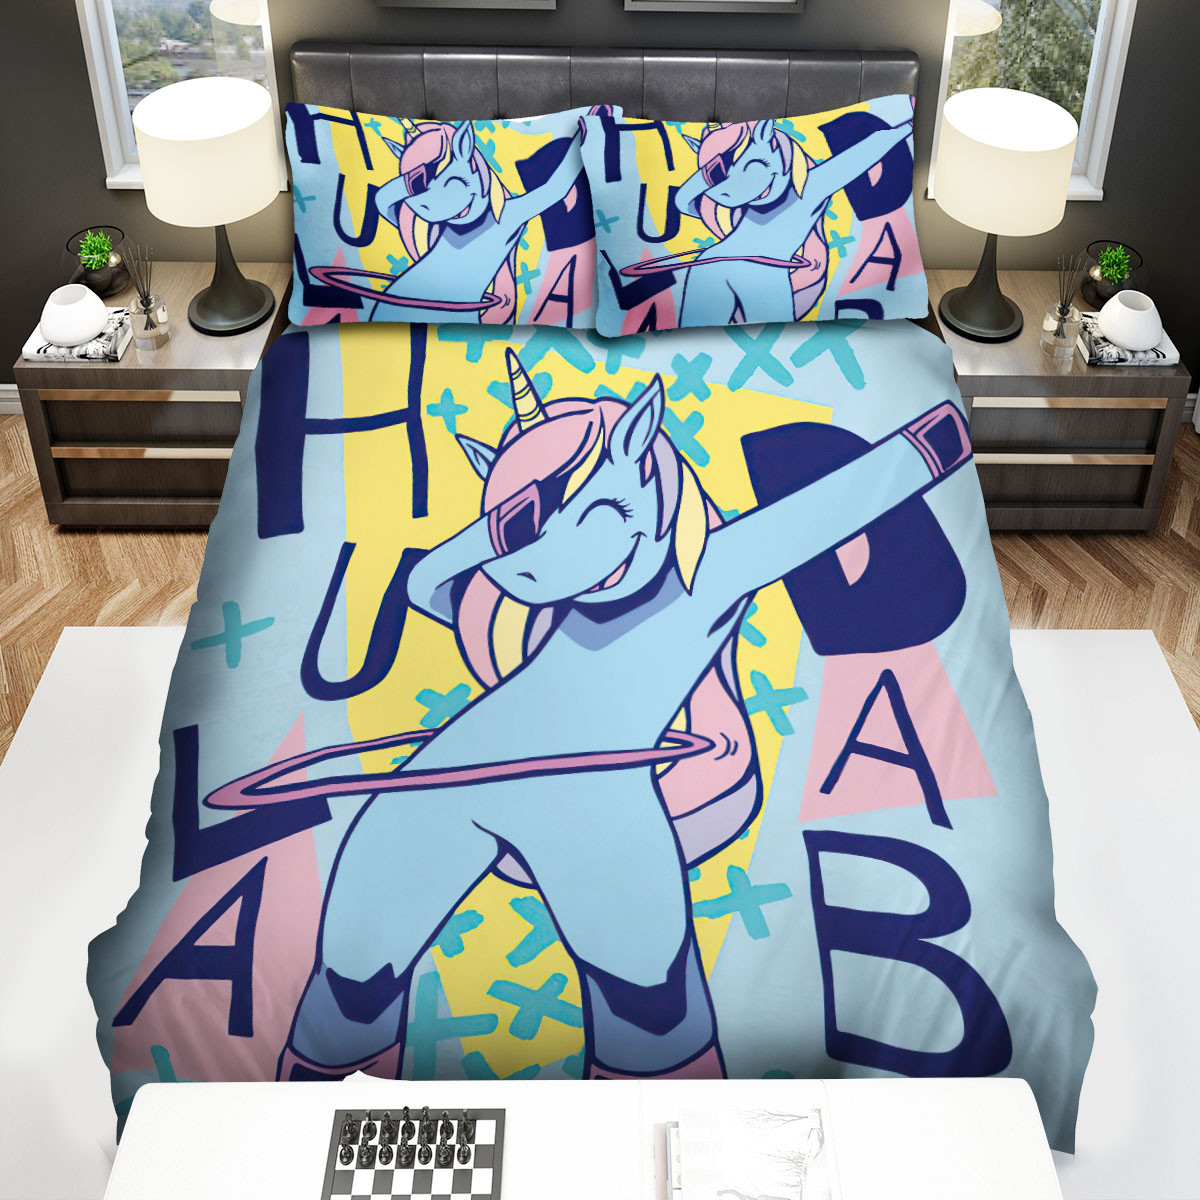 unicorn bedding sets with duvet cover and sheets xojcu